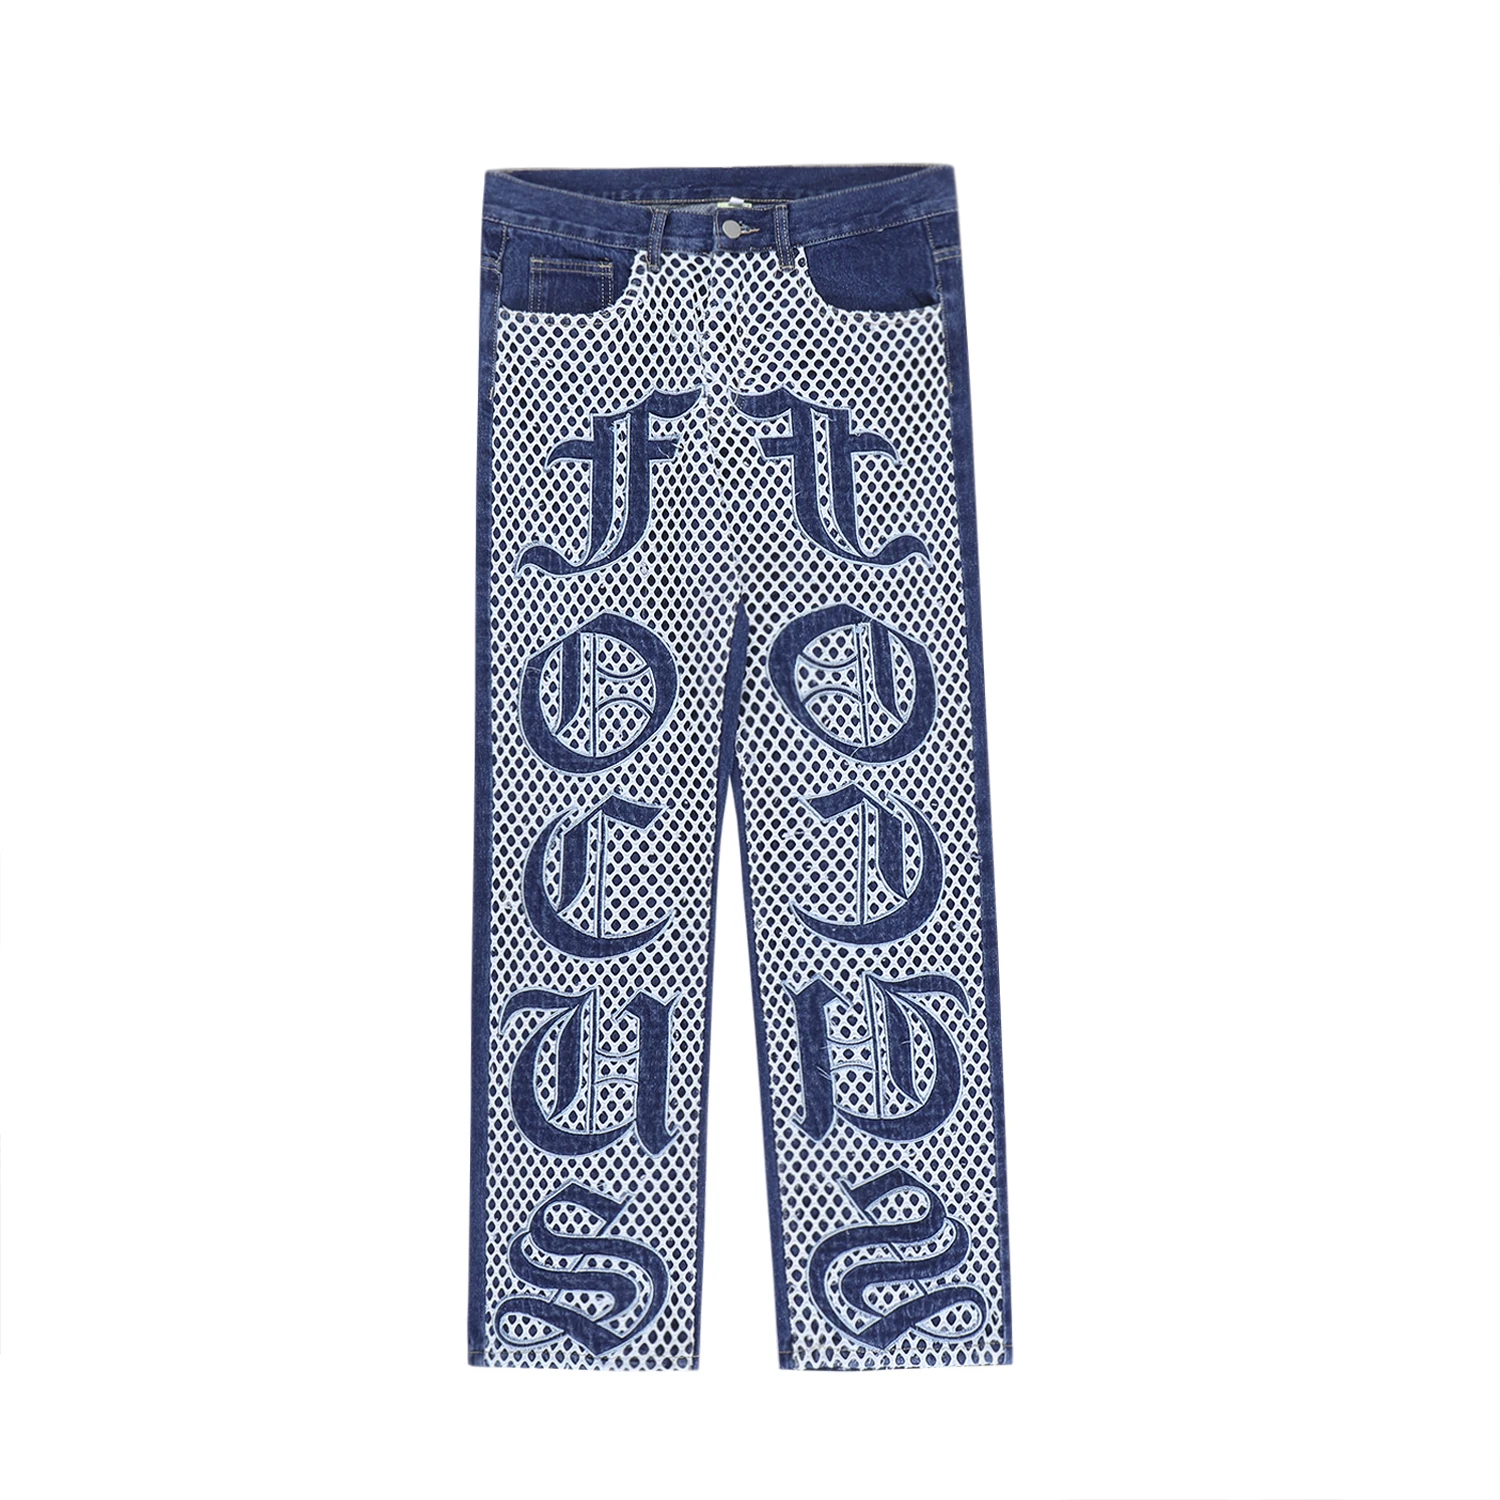 Blue Mesh Patch Gothic Letter Embroidery Straight Jeans Mens Black Fashion Casual Patchwork Denim Trousers